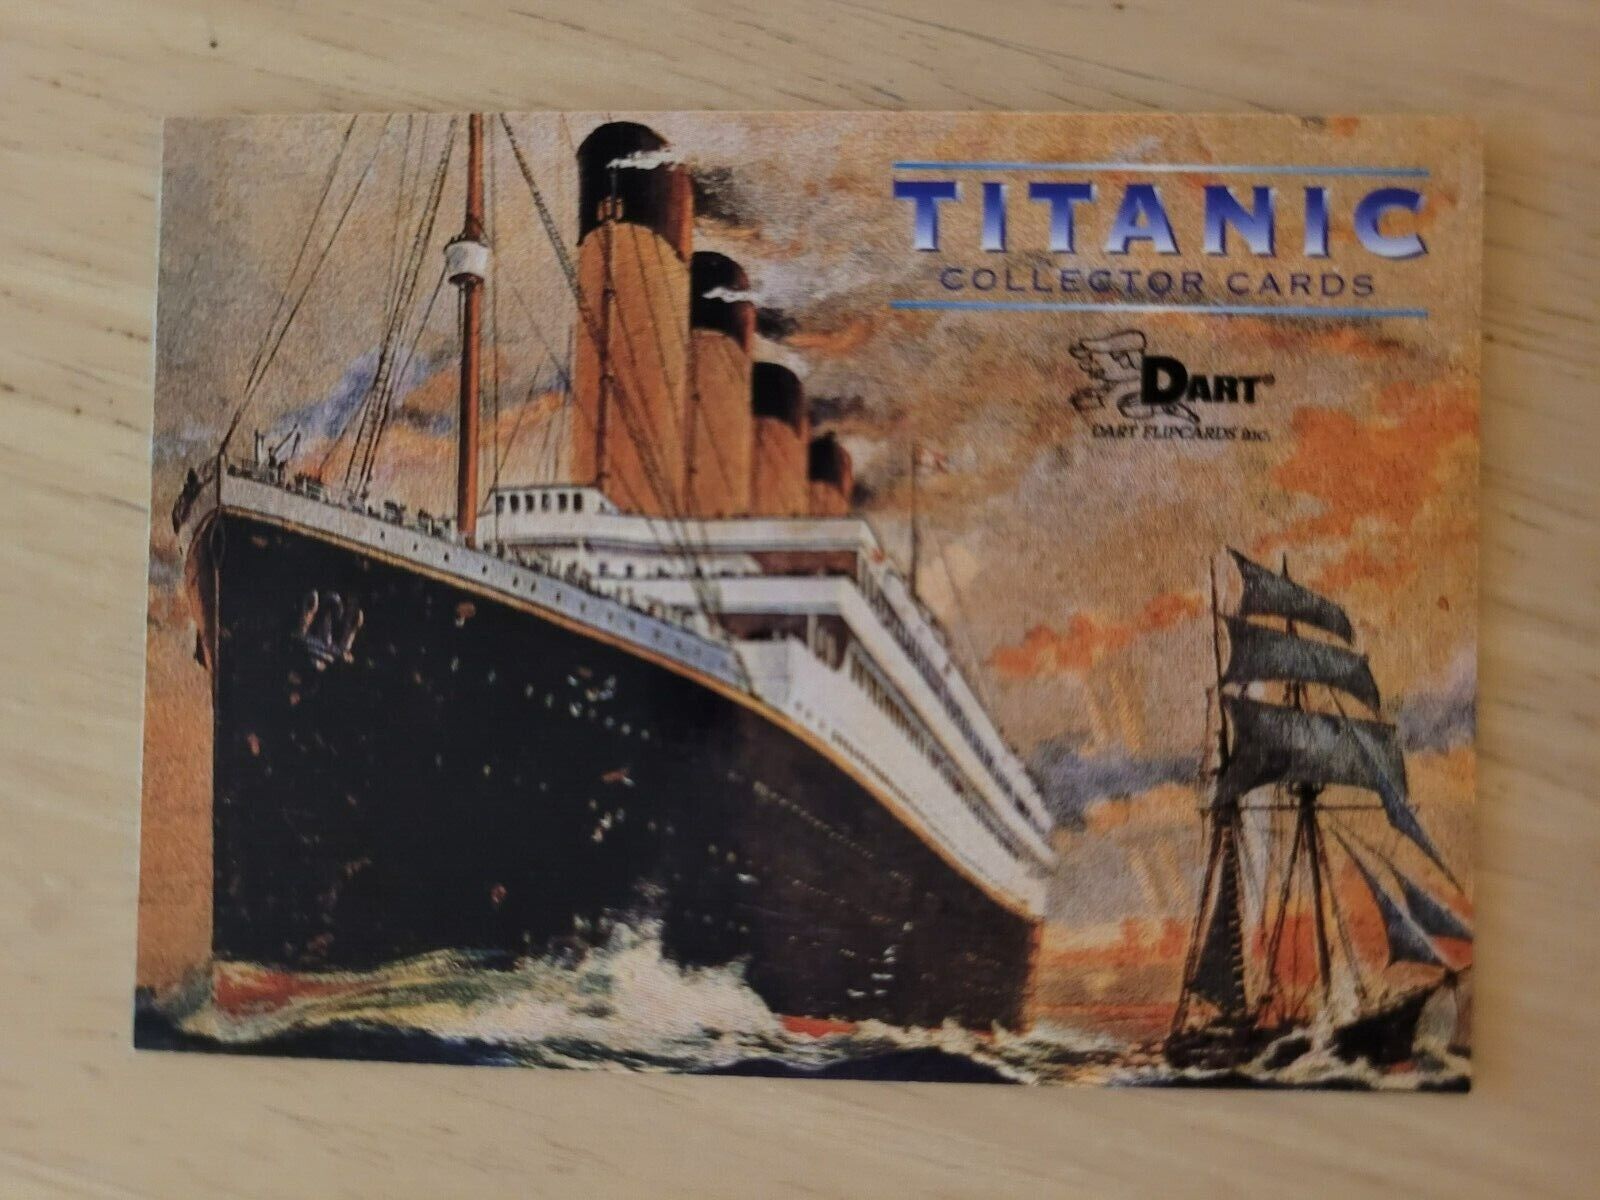 1998 TITANIC COLLECTOR CARDS -DENIS COCHRANE COLLECTION DART -COMPLETE YOUR SET